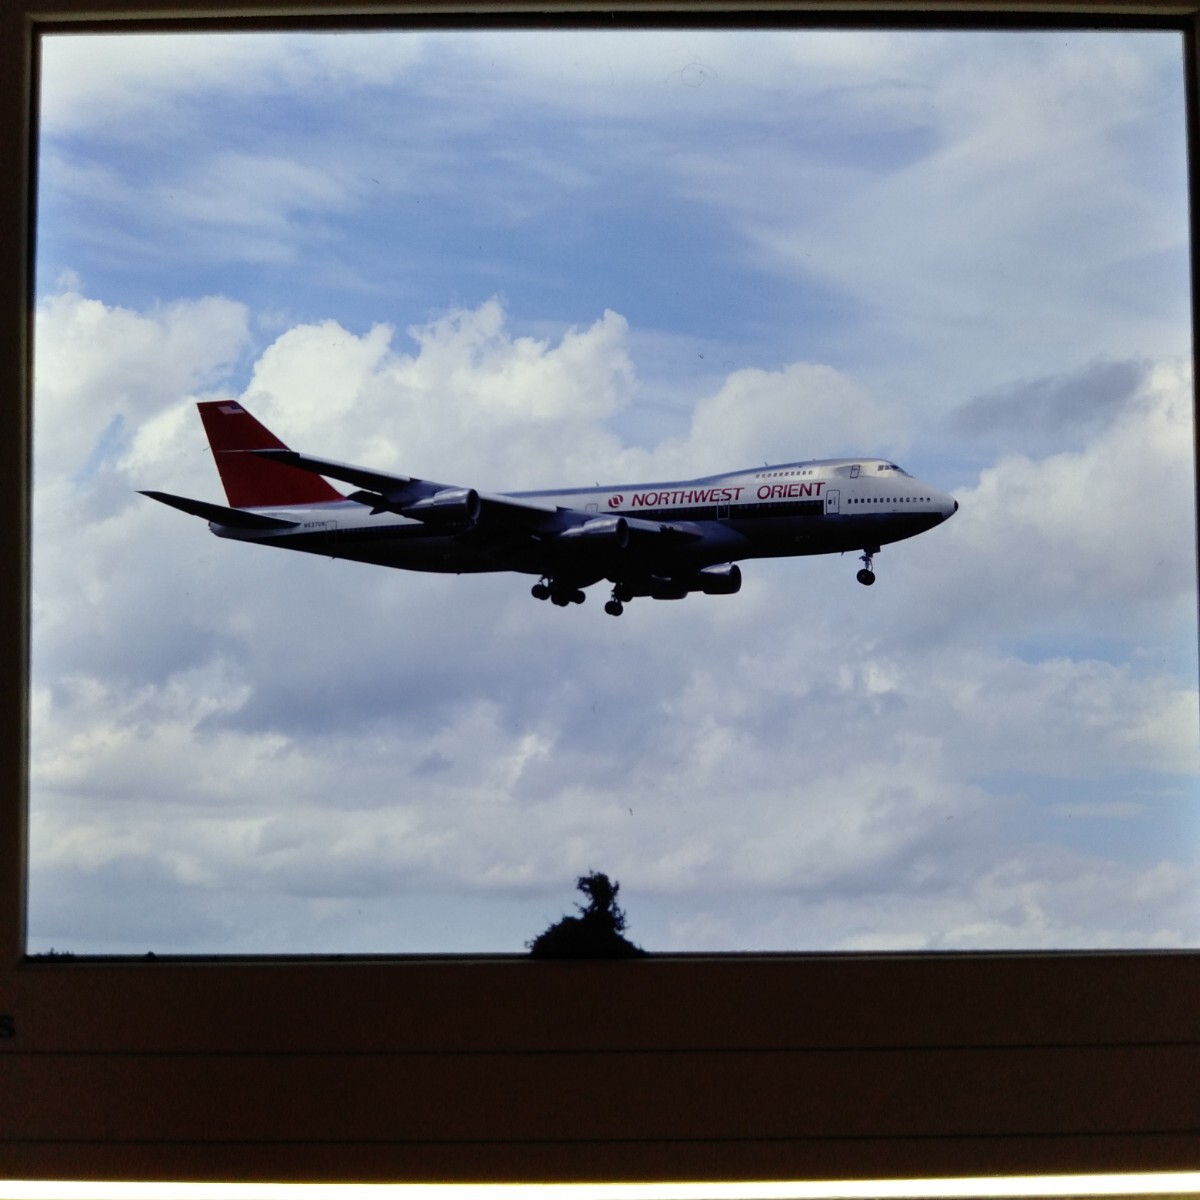 ne056 aircraft Northwest Airlines bo- wing 747nega camera mania . warehouse goods delivery collection 6 sheets together 